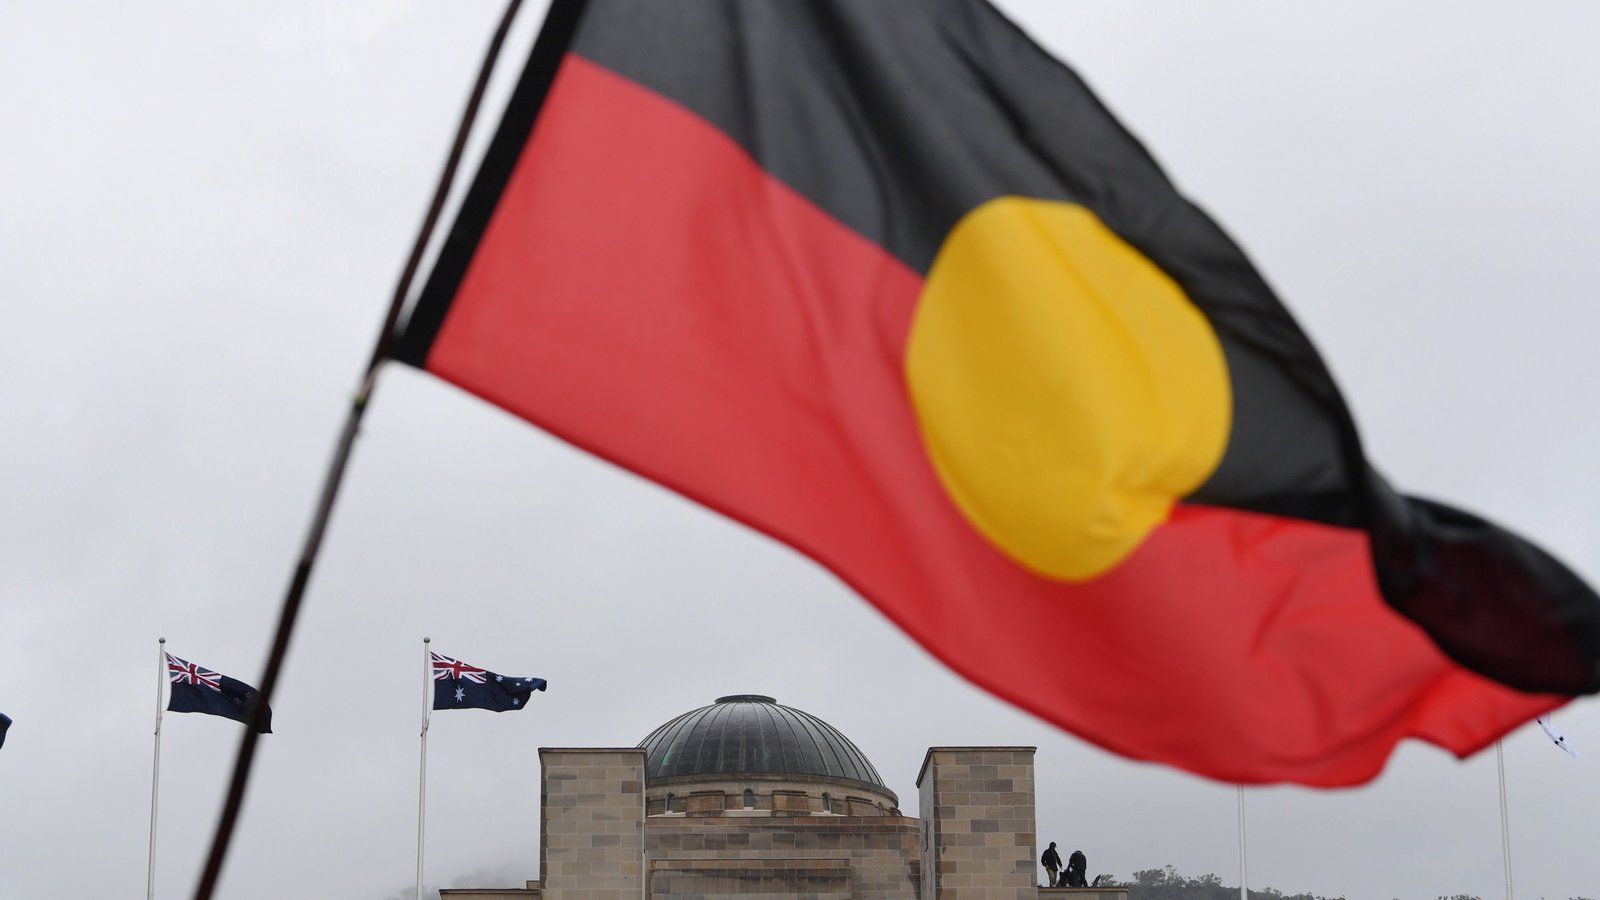 New Emoji Is a Meaningful Symbol for Indigenous Australians